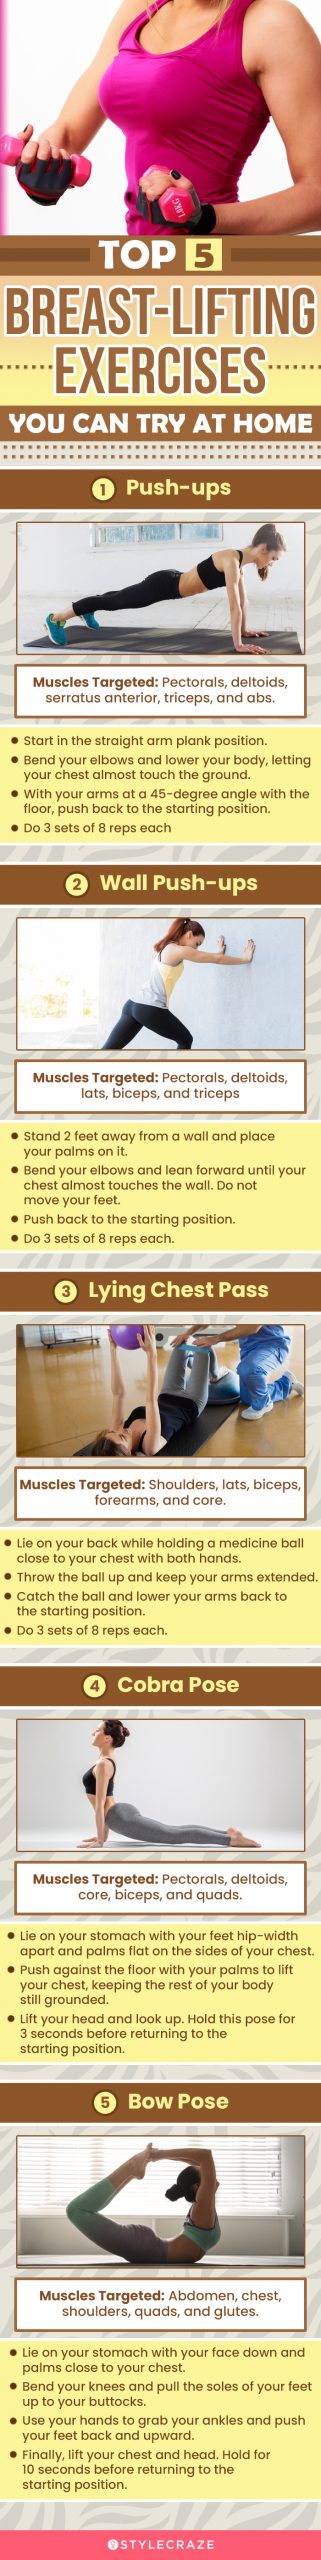 top 5 breast-lifting exercises you can try at home (infographic)